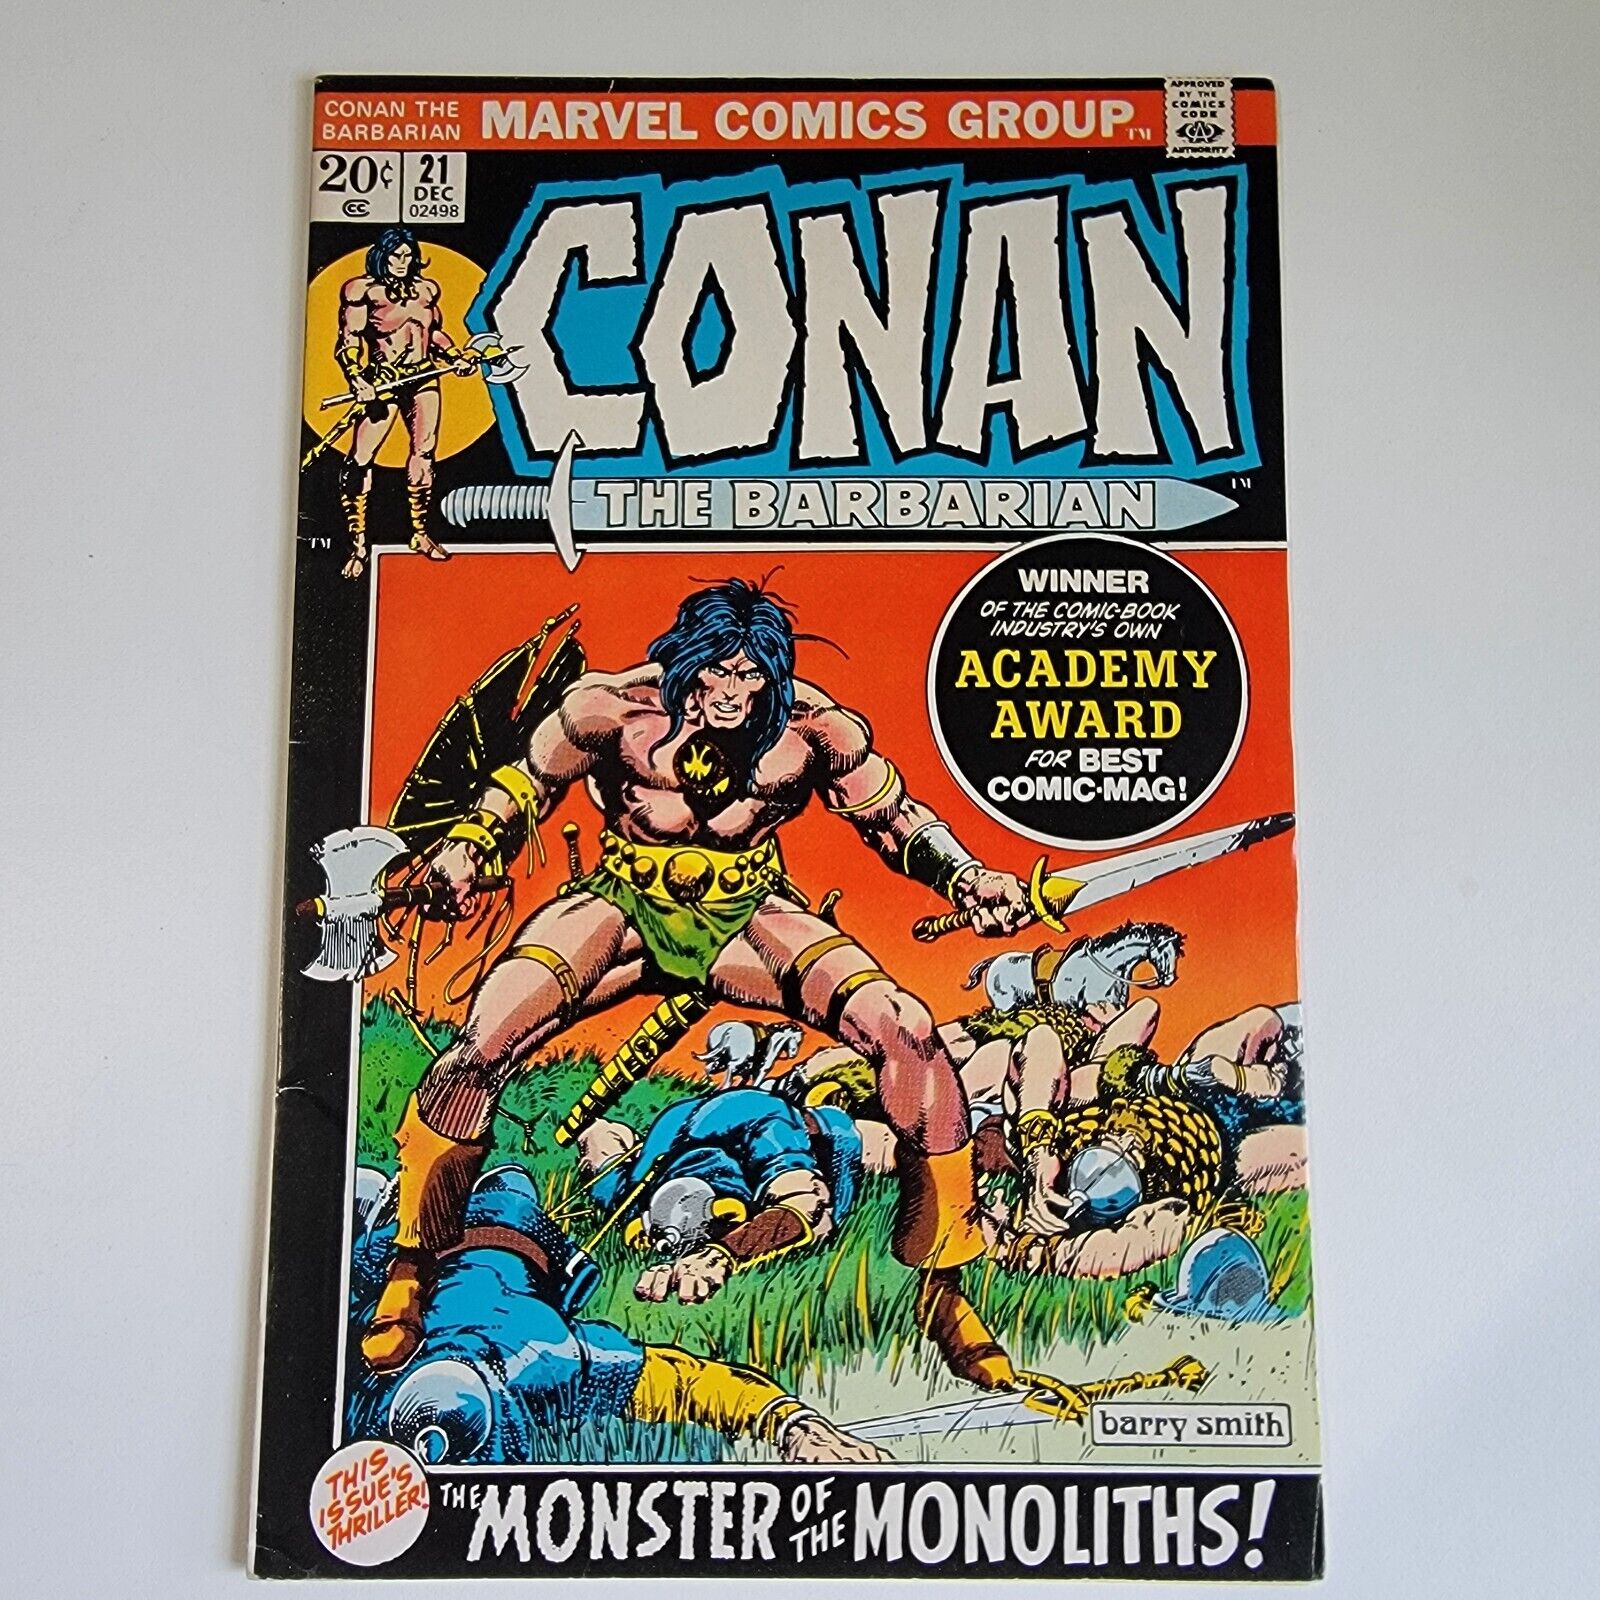 Conan the Barbarian #21 1972 The Monster of the Monoliths